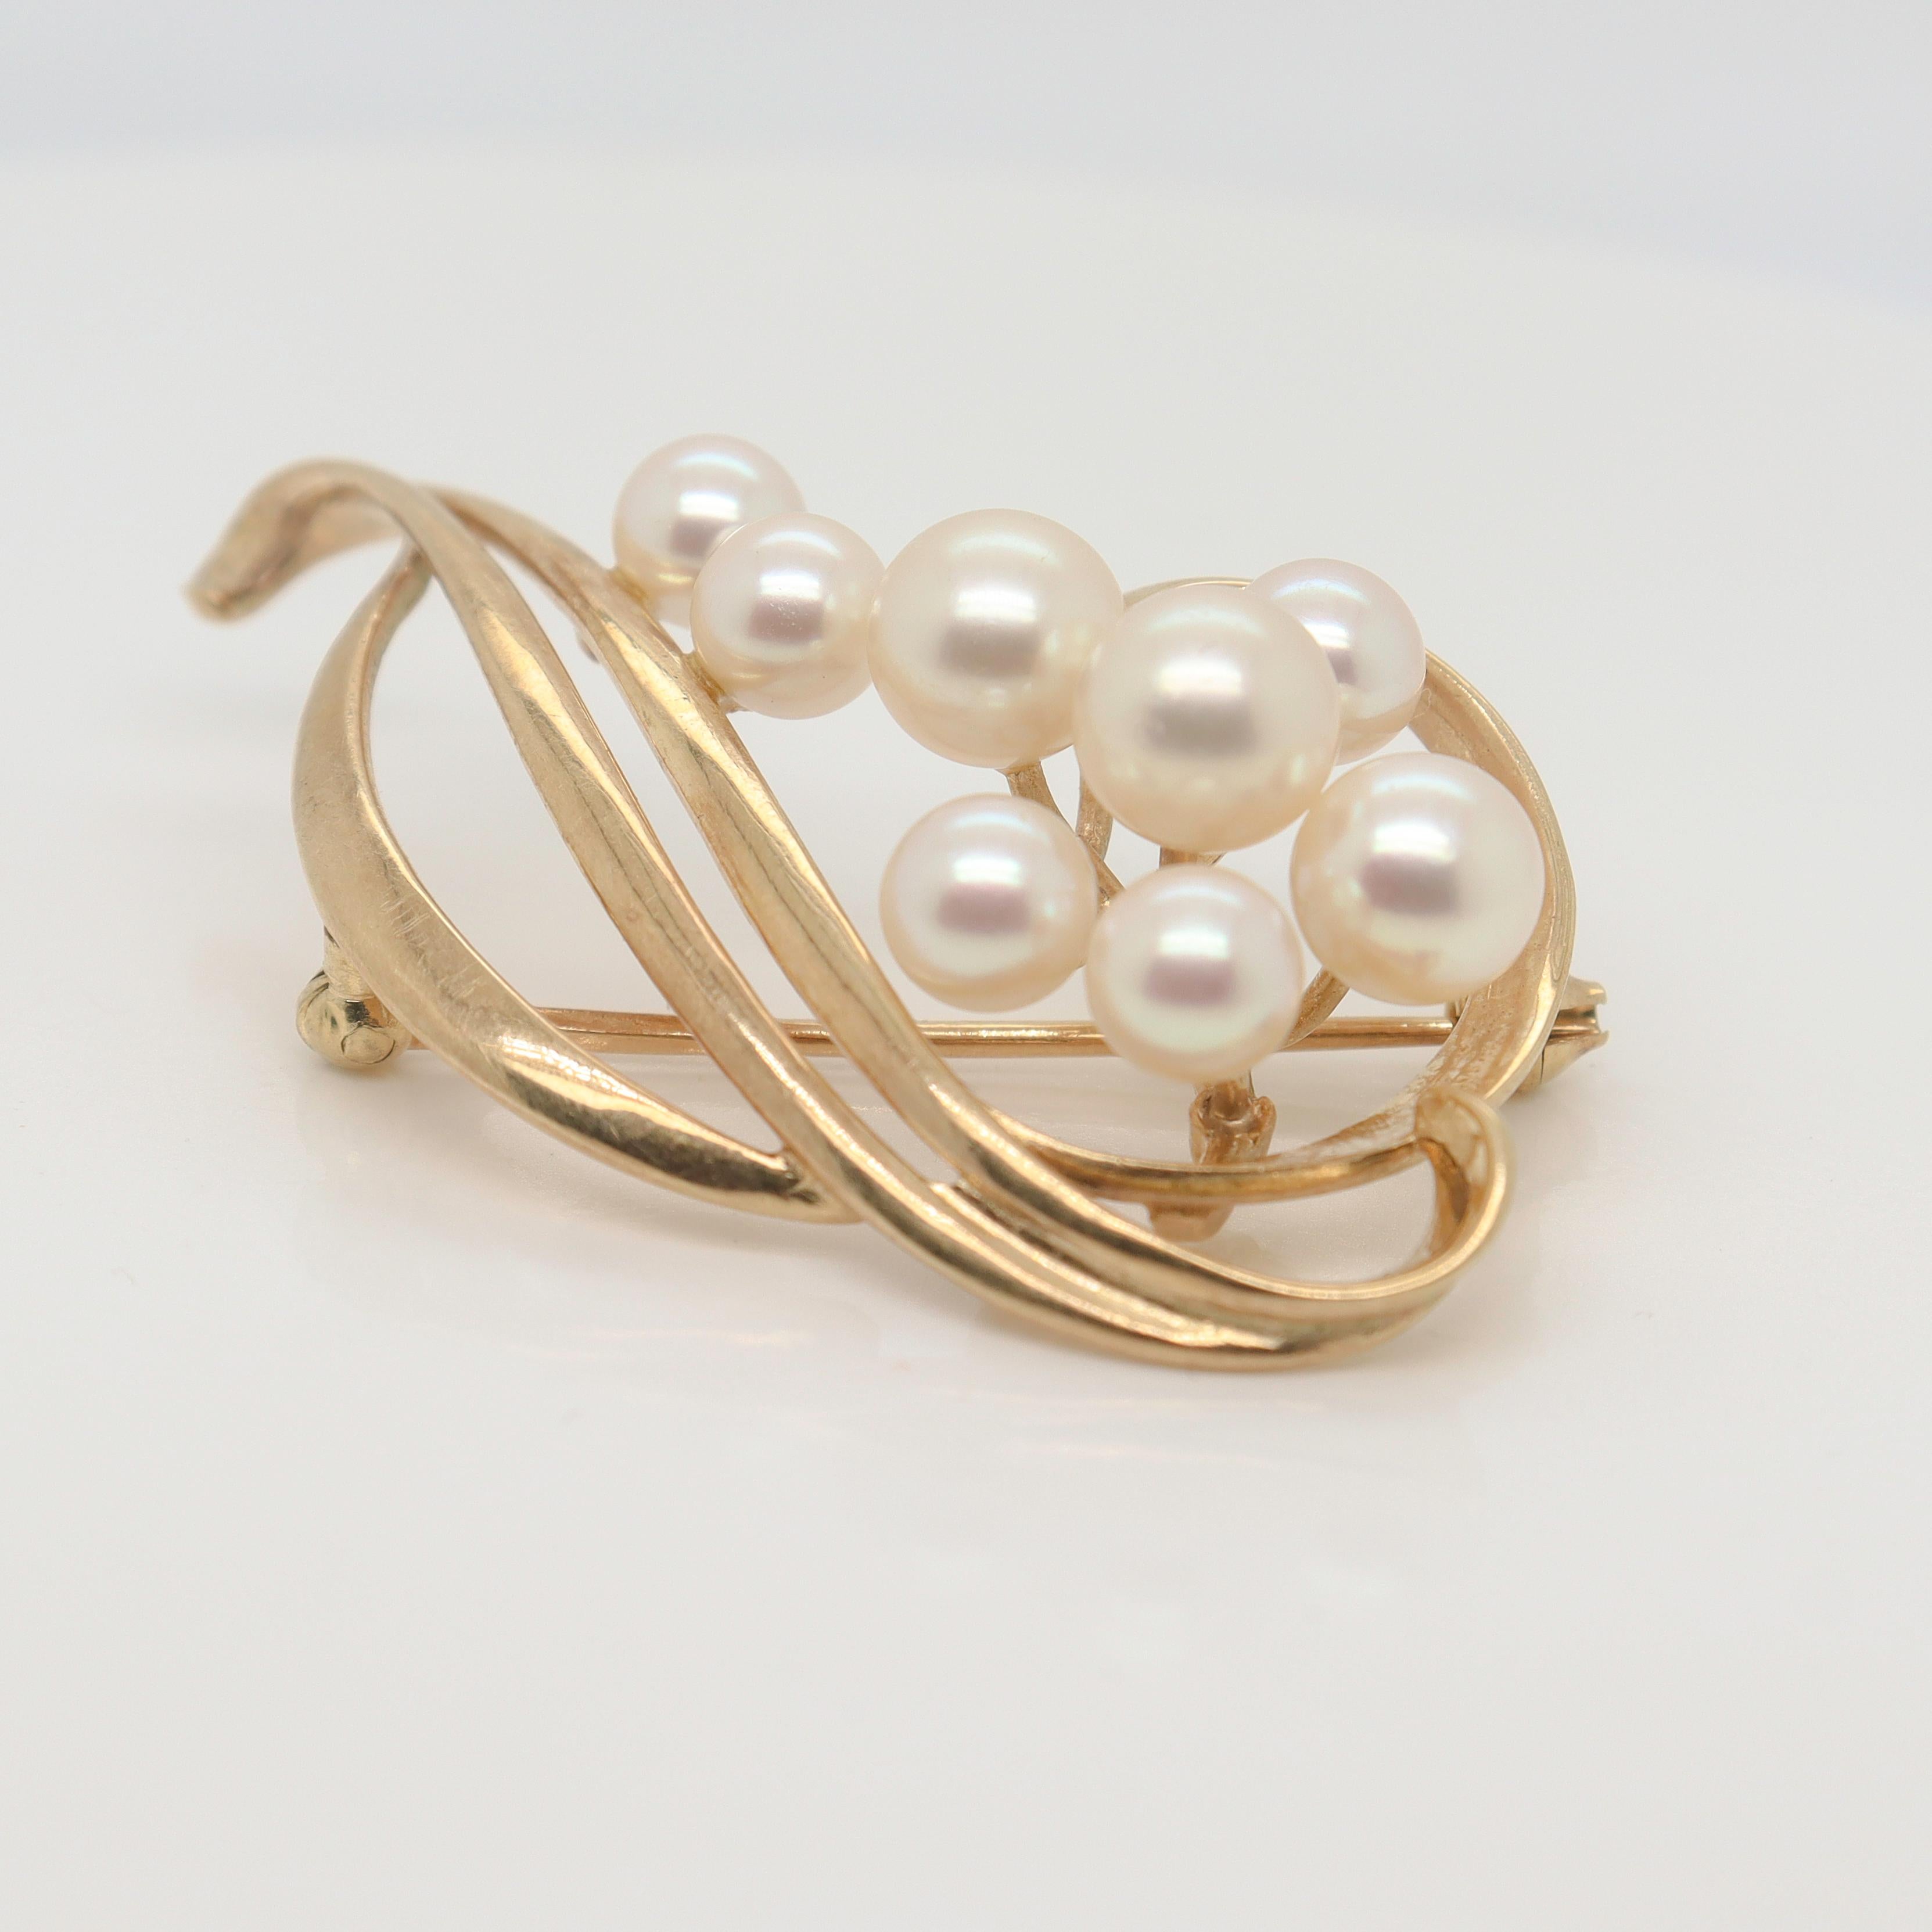 A fine Japanese Modern gold & pearl brooch.

By Mikimoto.

In 14k gold.

Set with 8 round white Akoya pearls.

Signed to the reverse.

Simply a wonderful Japanese modernist brooch!

Date:
Mid to Late 20th Century

Overall Condition:
It is in overall